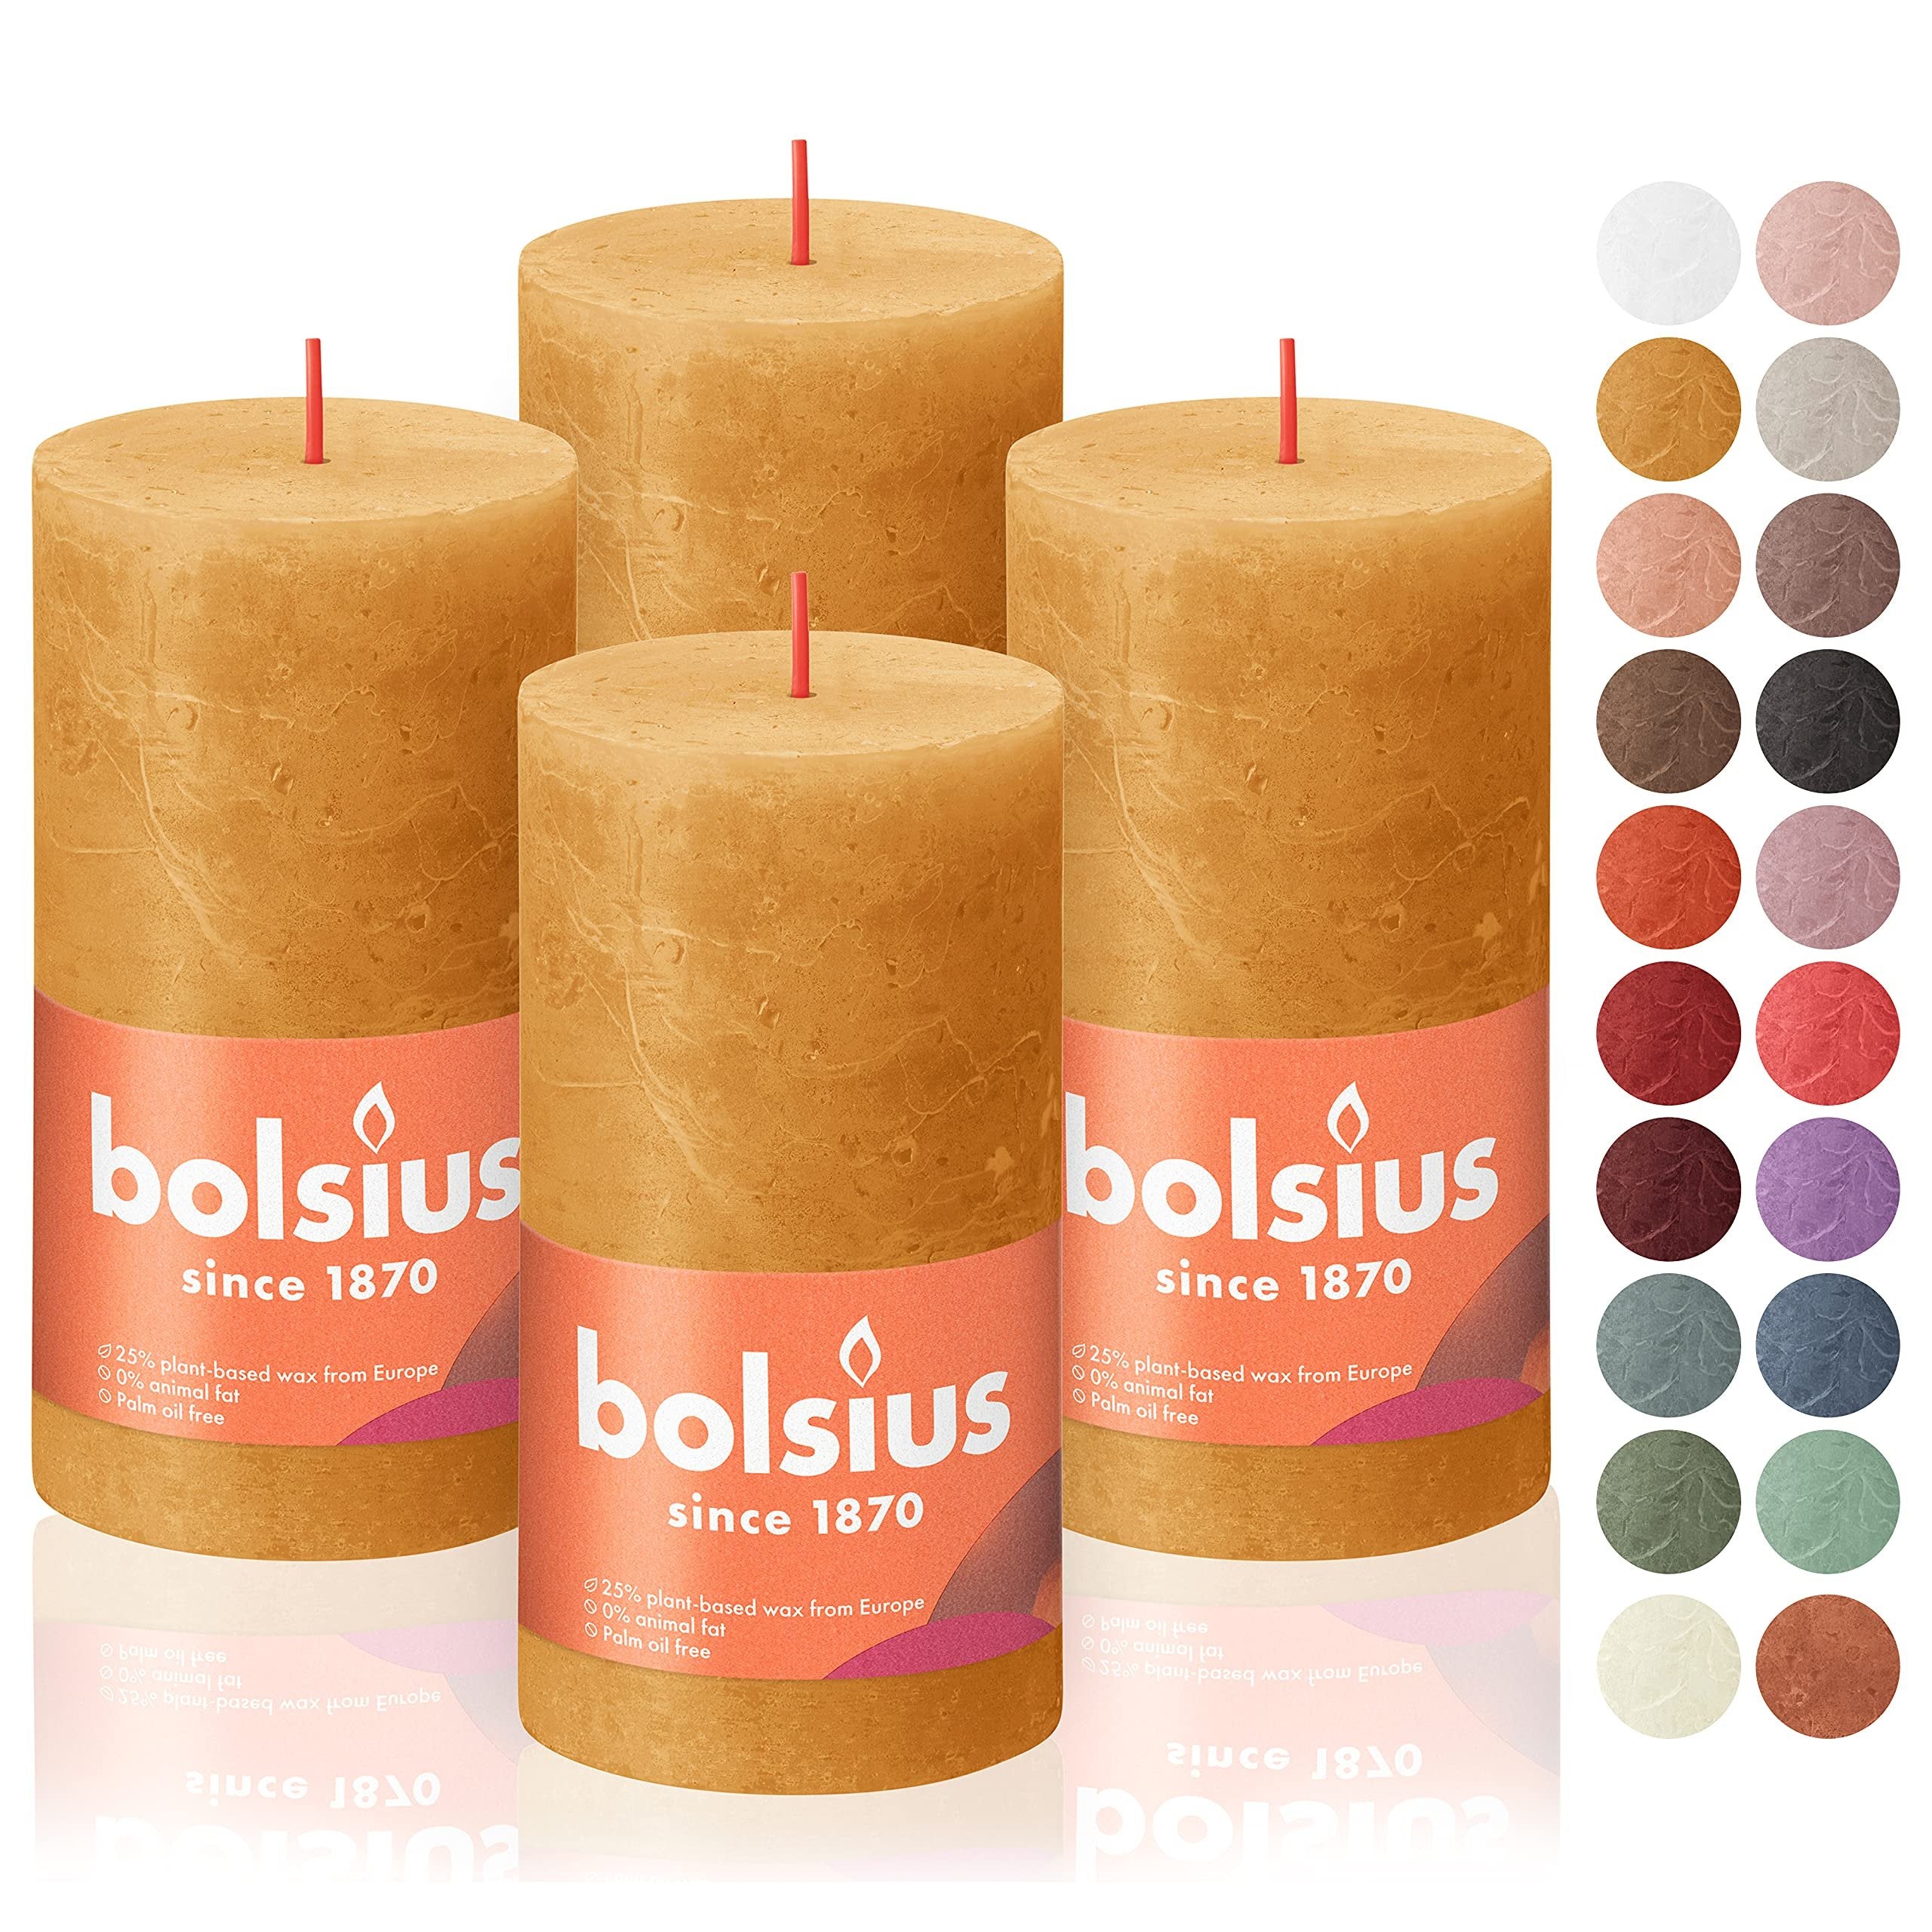 BOLSIUS 4 Pack Yellow Rustic Pillar Candles - 2.75 X 5 Inches - Premium European Quality - Includes Natural Plant-Based Wax - Unscented Dripless Smokeless 60 Hour Party Décor and Wedding Candles